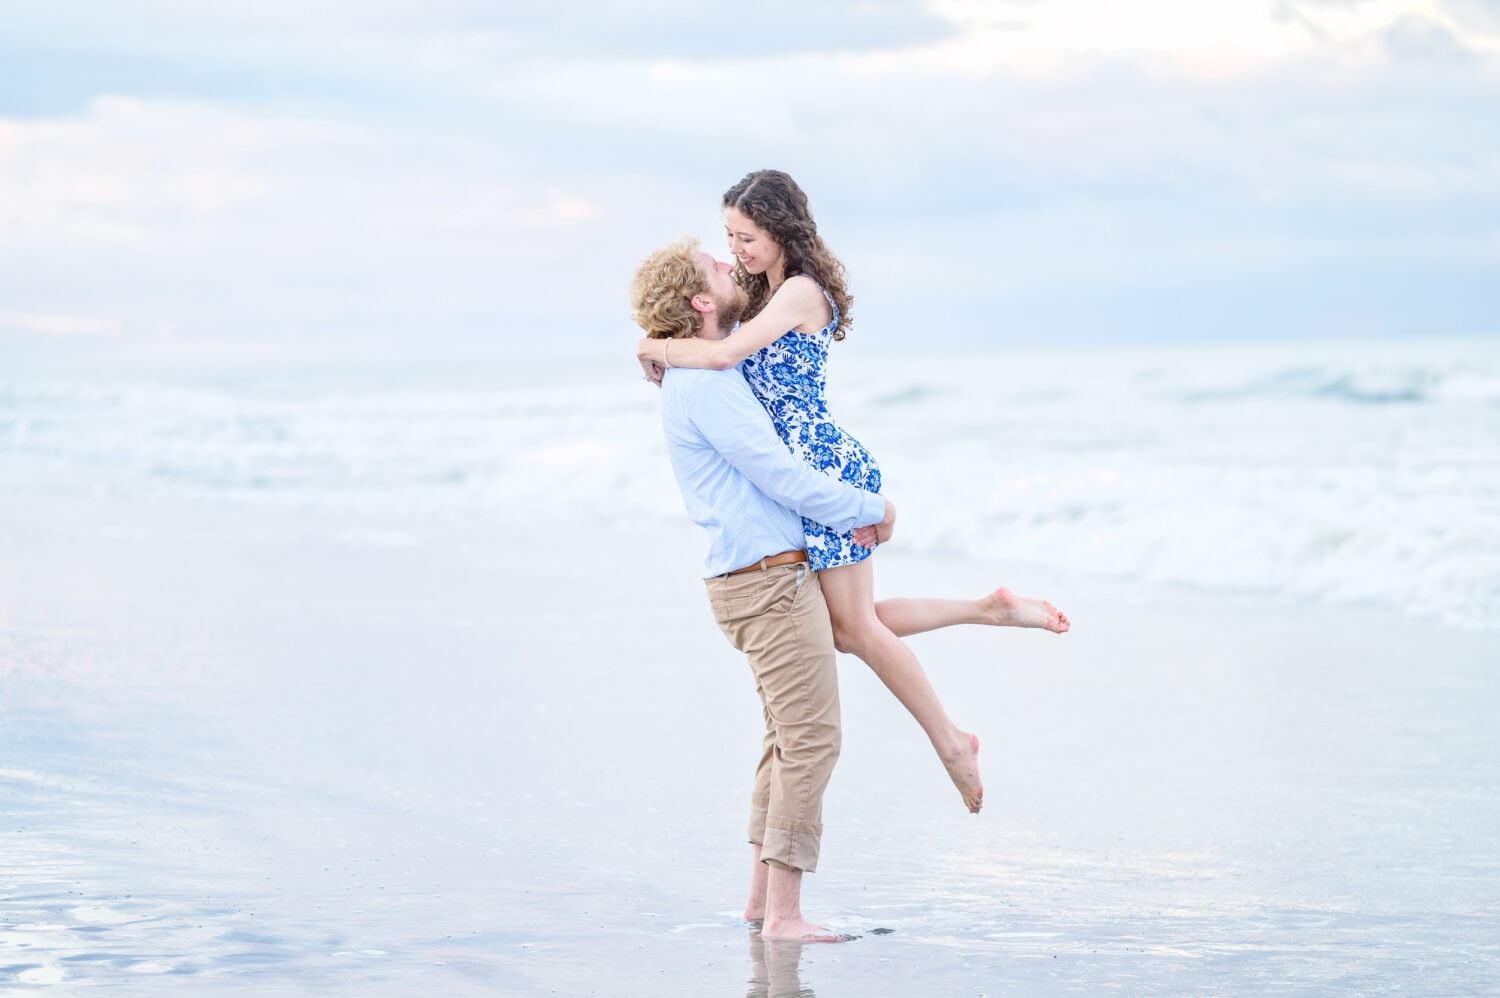 Lifting his fiance into the air by the ocean - Huntington Beach State Park